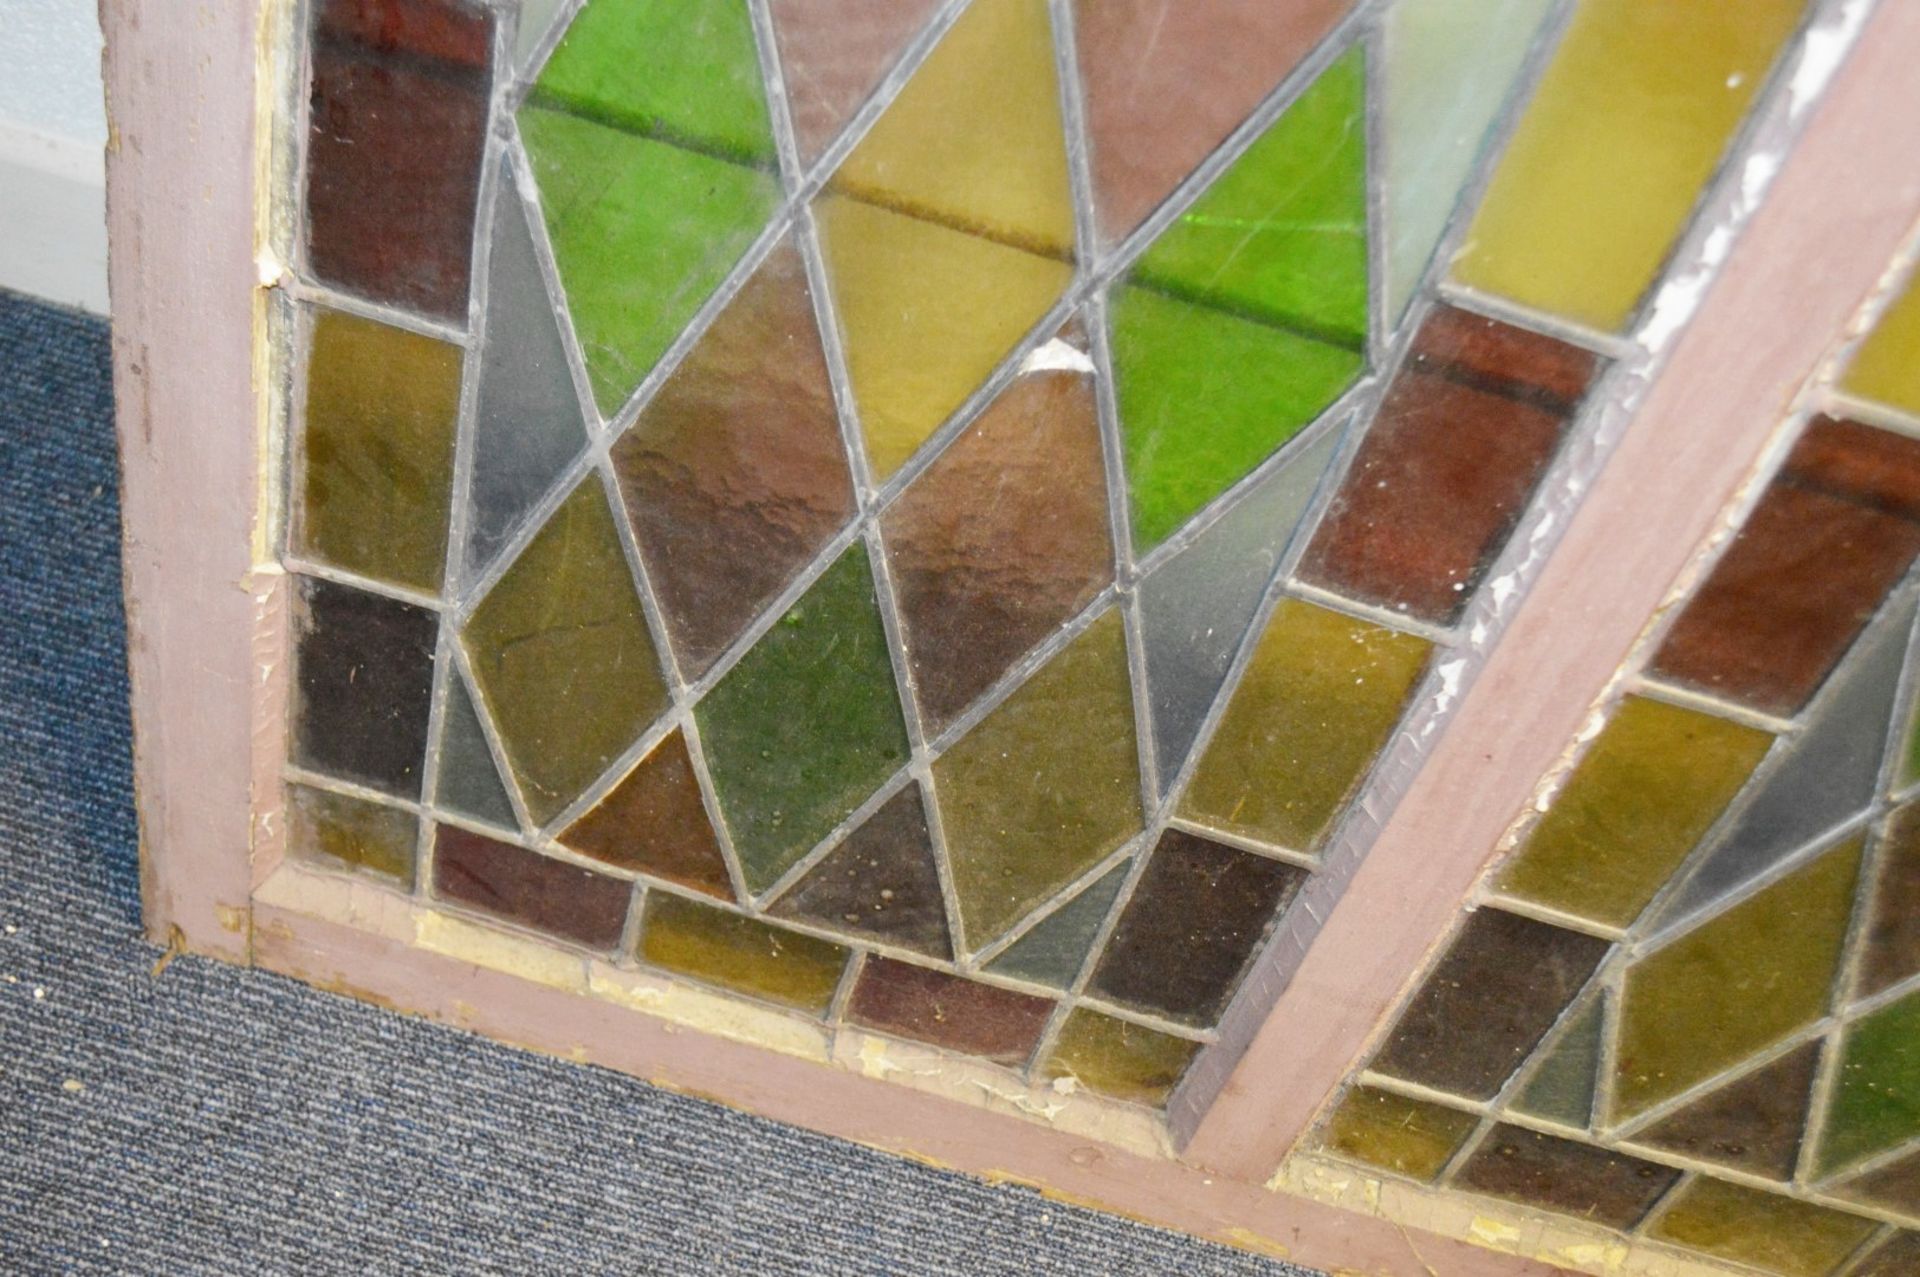 1 x Stained Glass Window - Dimensions: W87.5 H124 x D4.5cm - Used, In Good Overall Condition - - Image 3 of 5